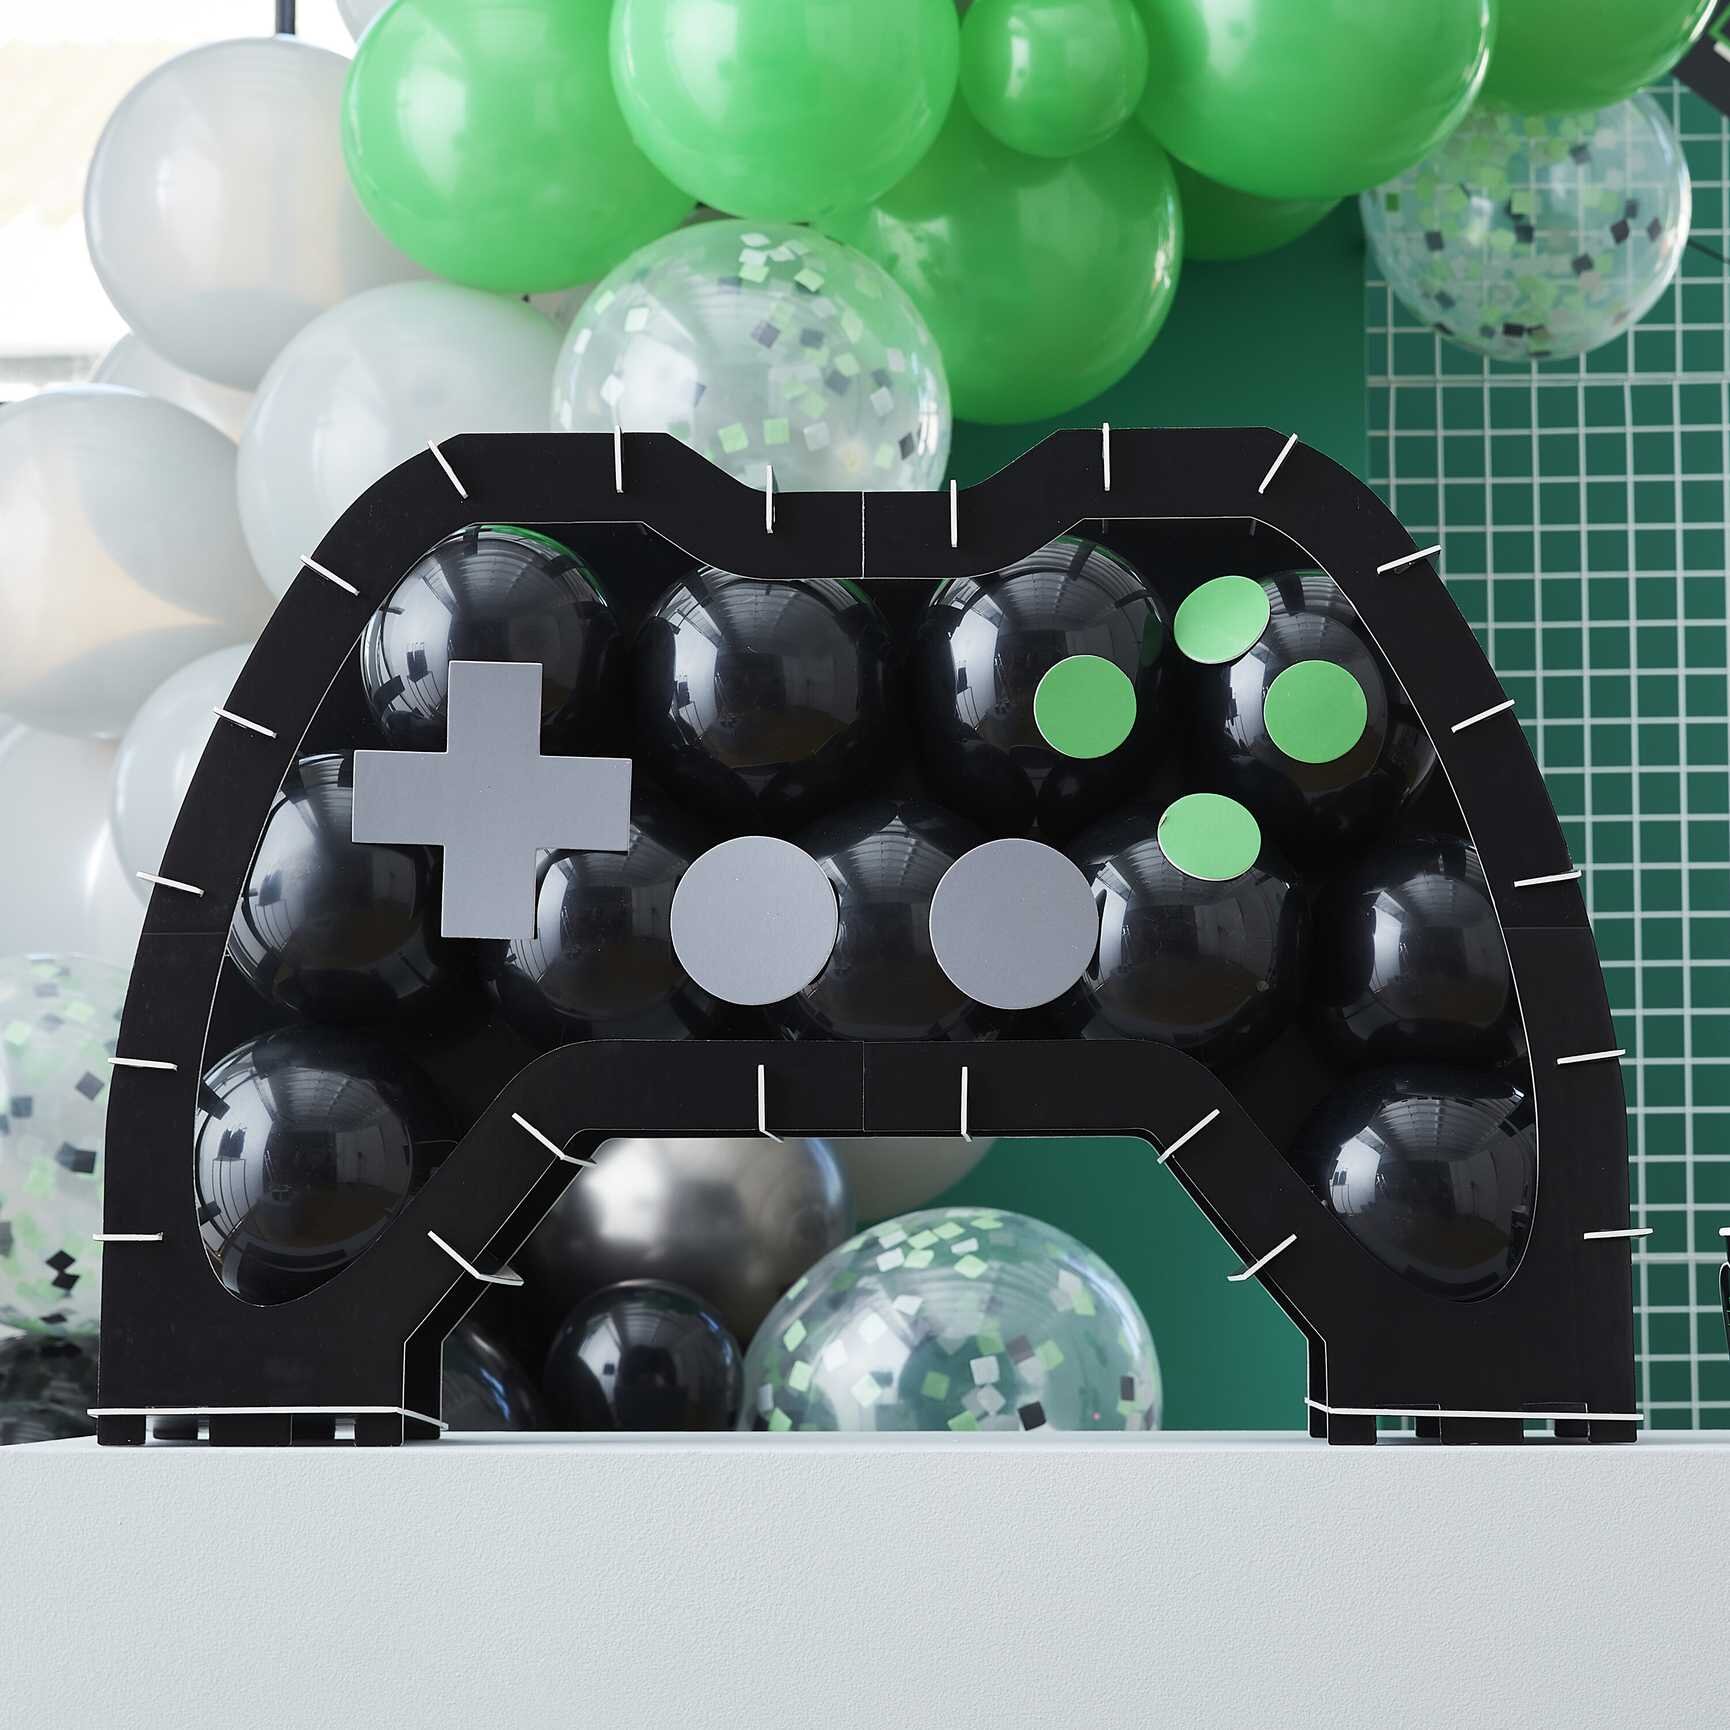 Game On - Ballondecoratie Gamecontroller 87 cm